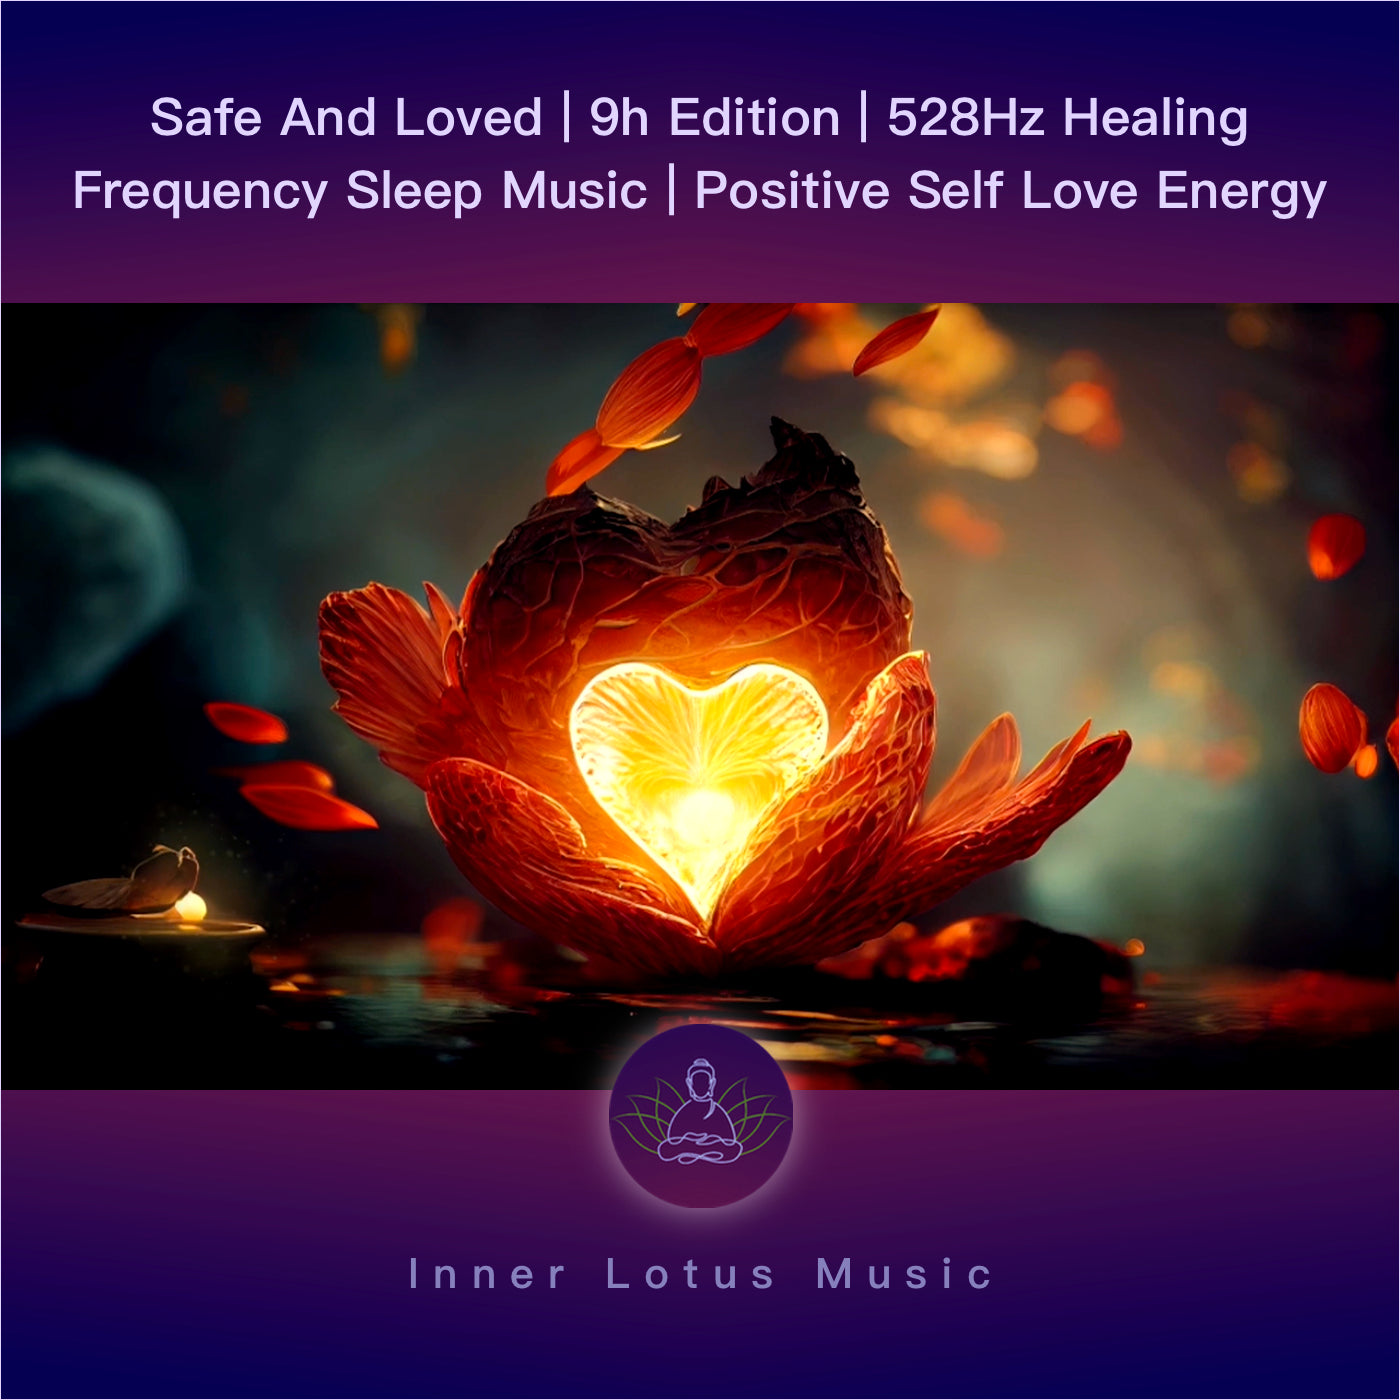 Safe And Loved | 9h Edition | 528Hz Healing Frequency Sleep Music | Positive Self Love Energy